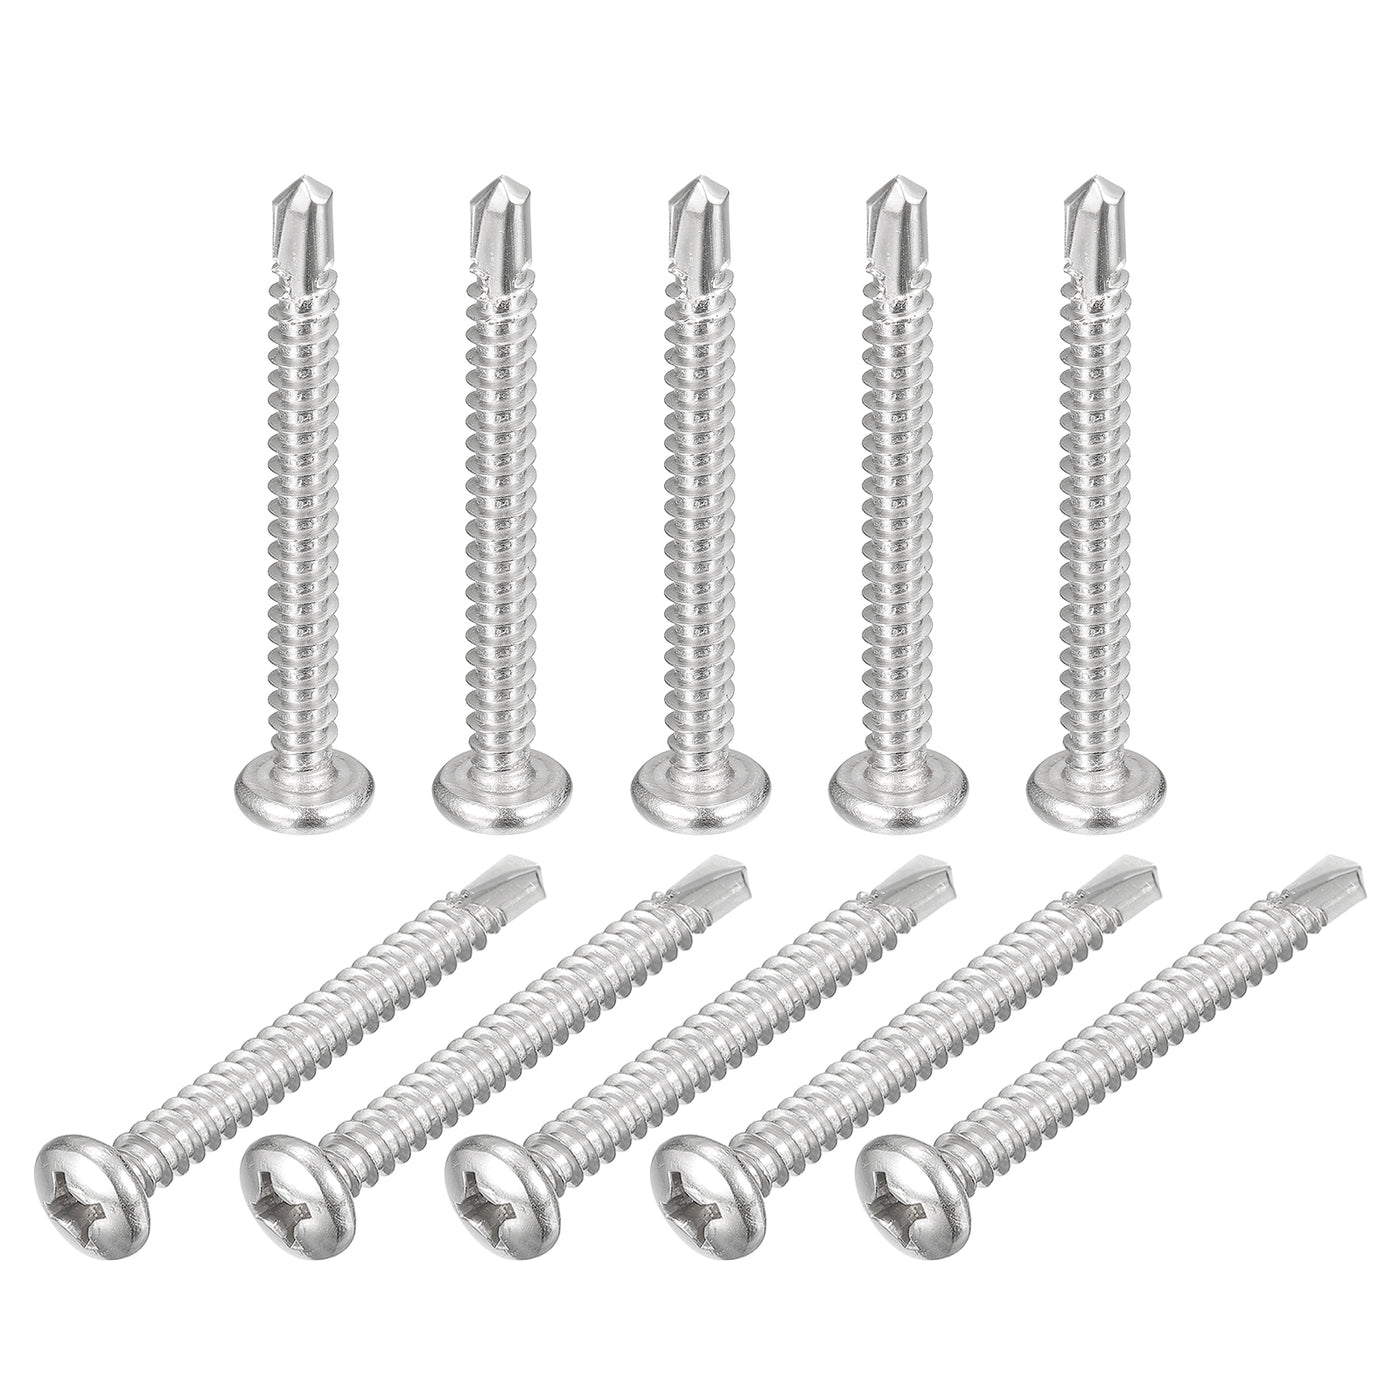 uxcell Uxcell #12 x 2" Self Drilling Screws, 20pcs Phillips Pan Head Self Tapping Screws